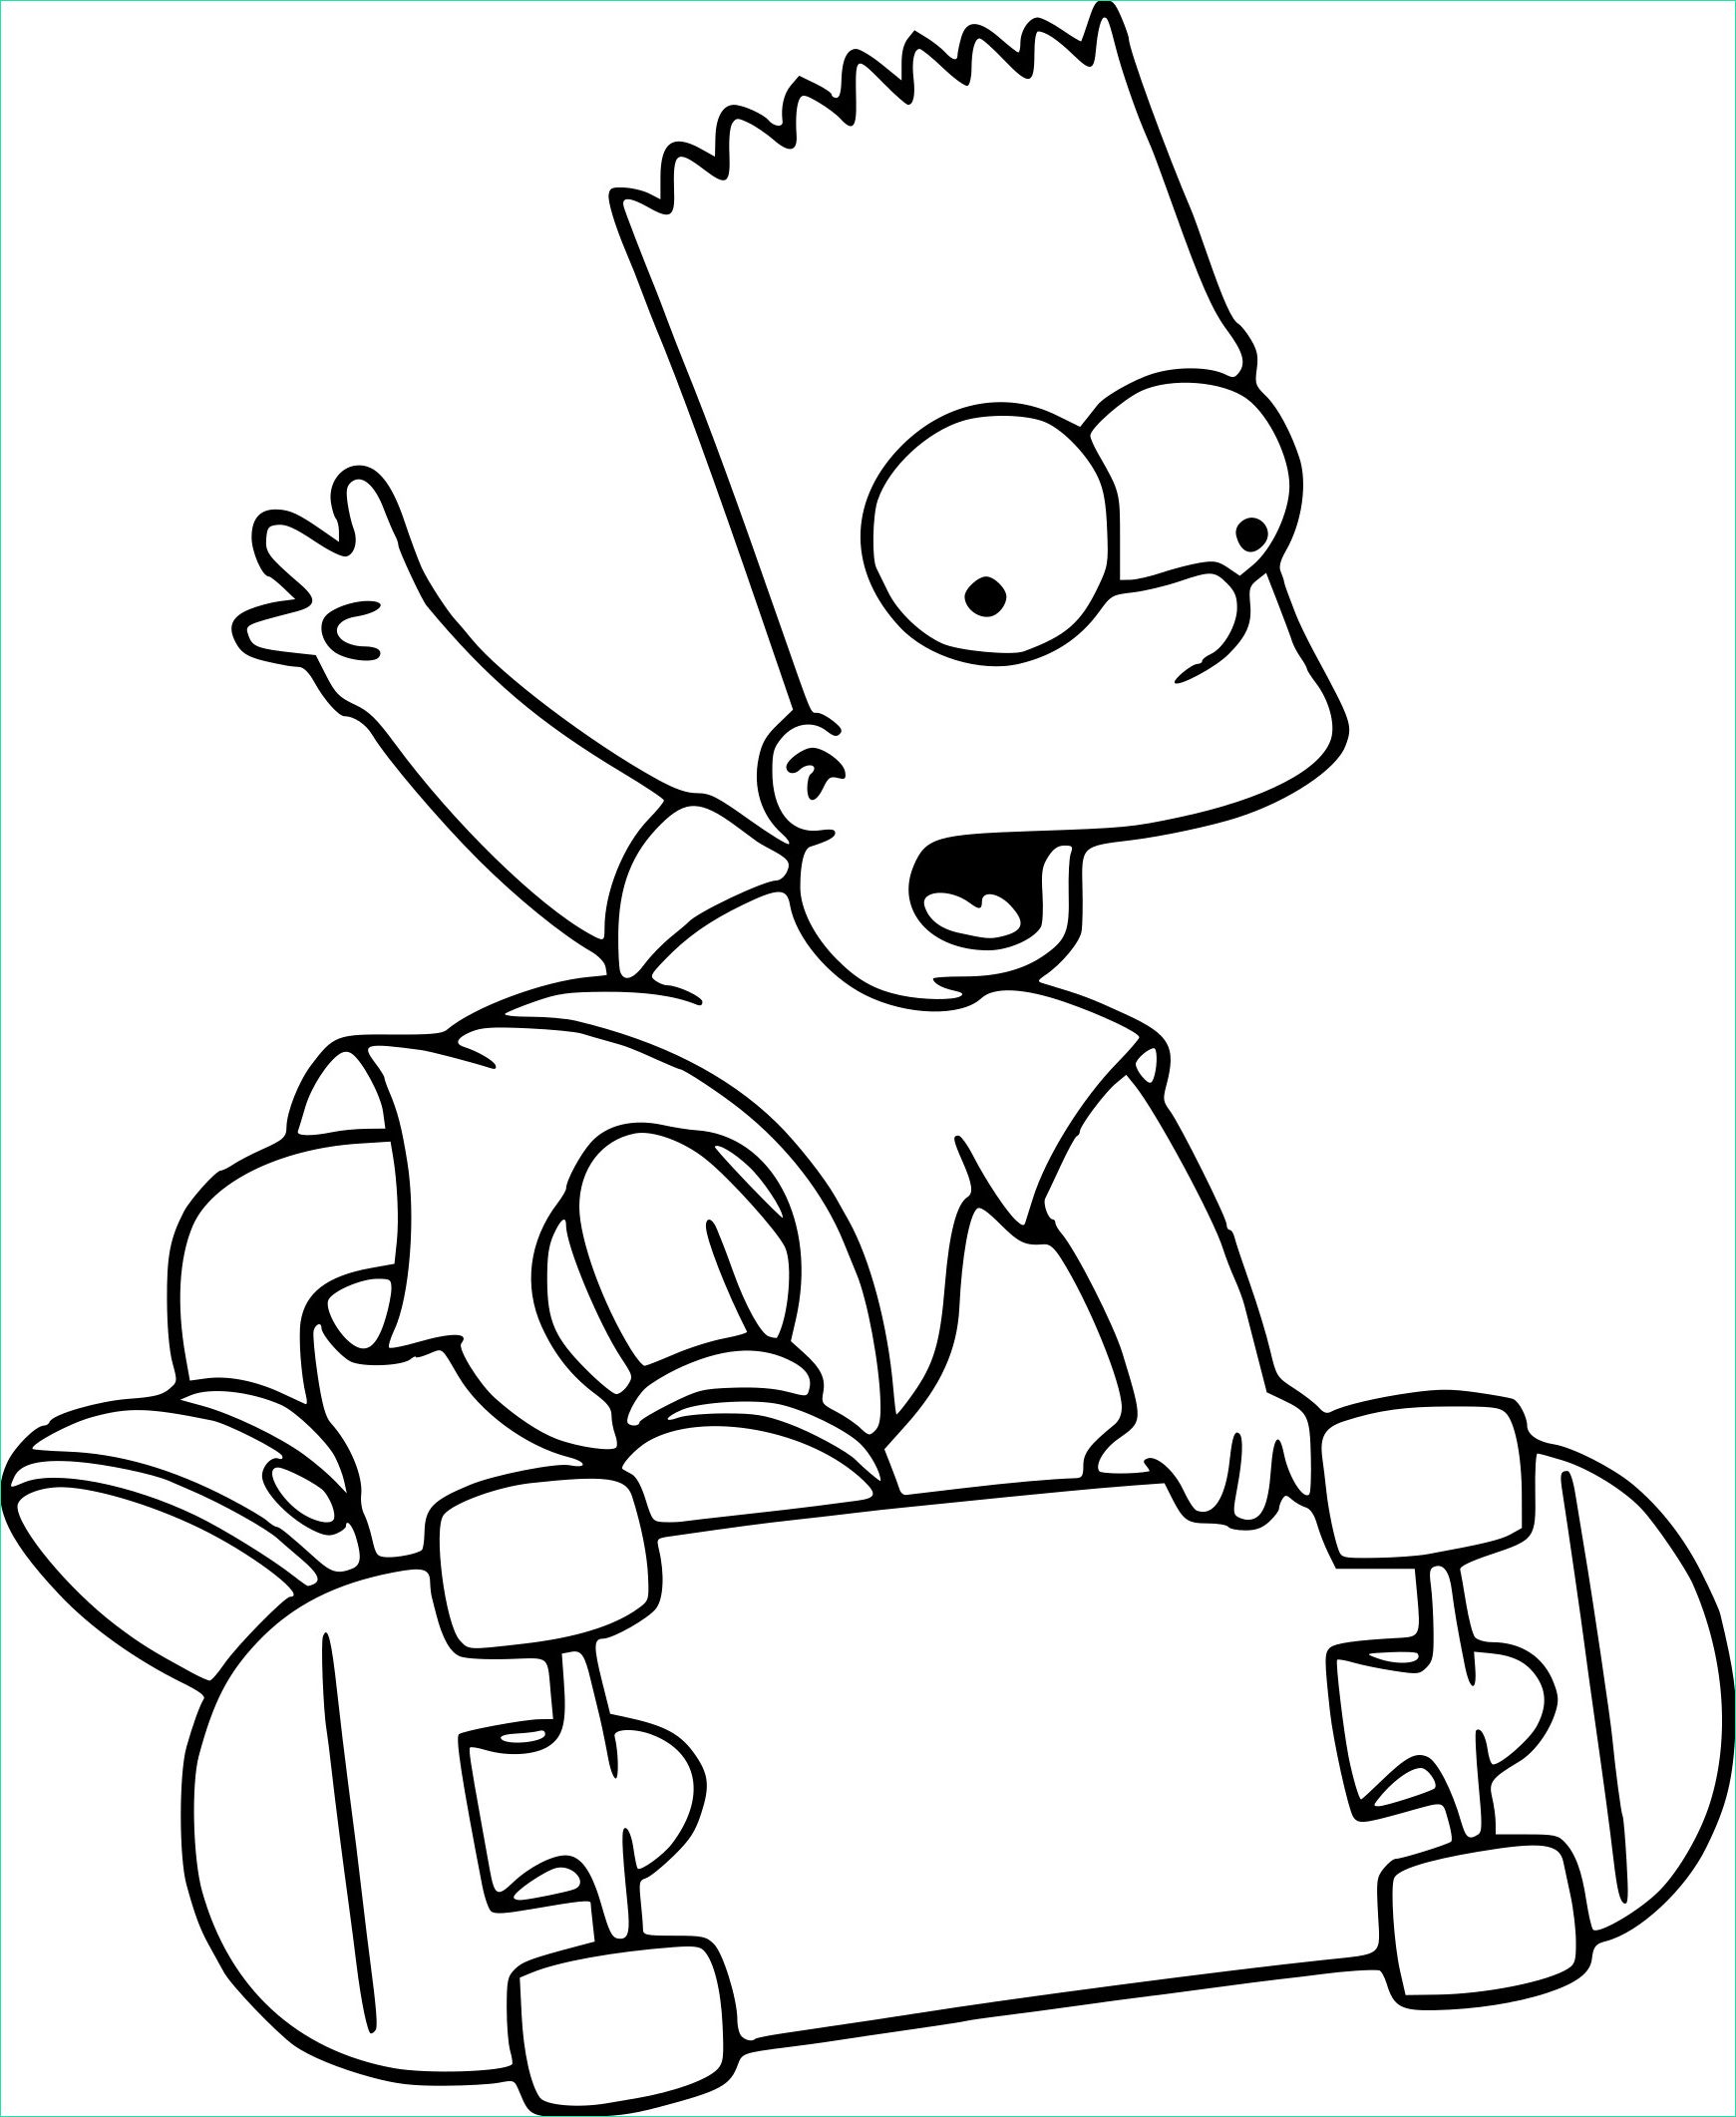 Simpson Coloriage Bestof Photos Simpson Dessin A Imprimer Related Keywords &amp; Suggestions